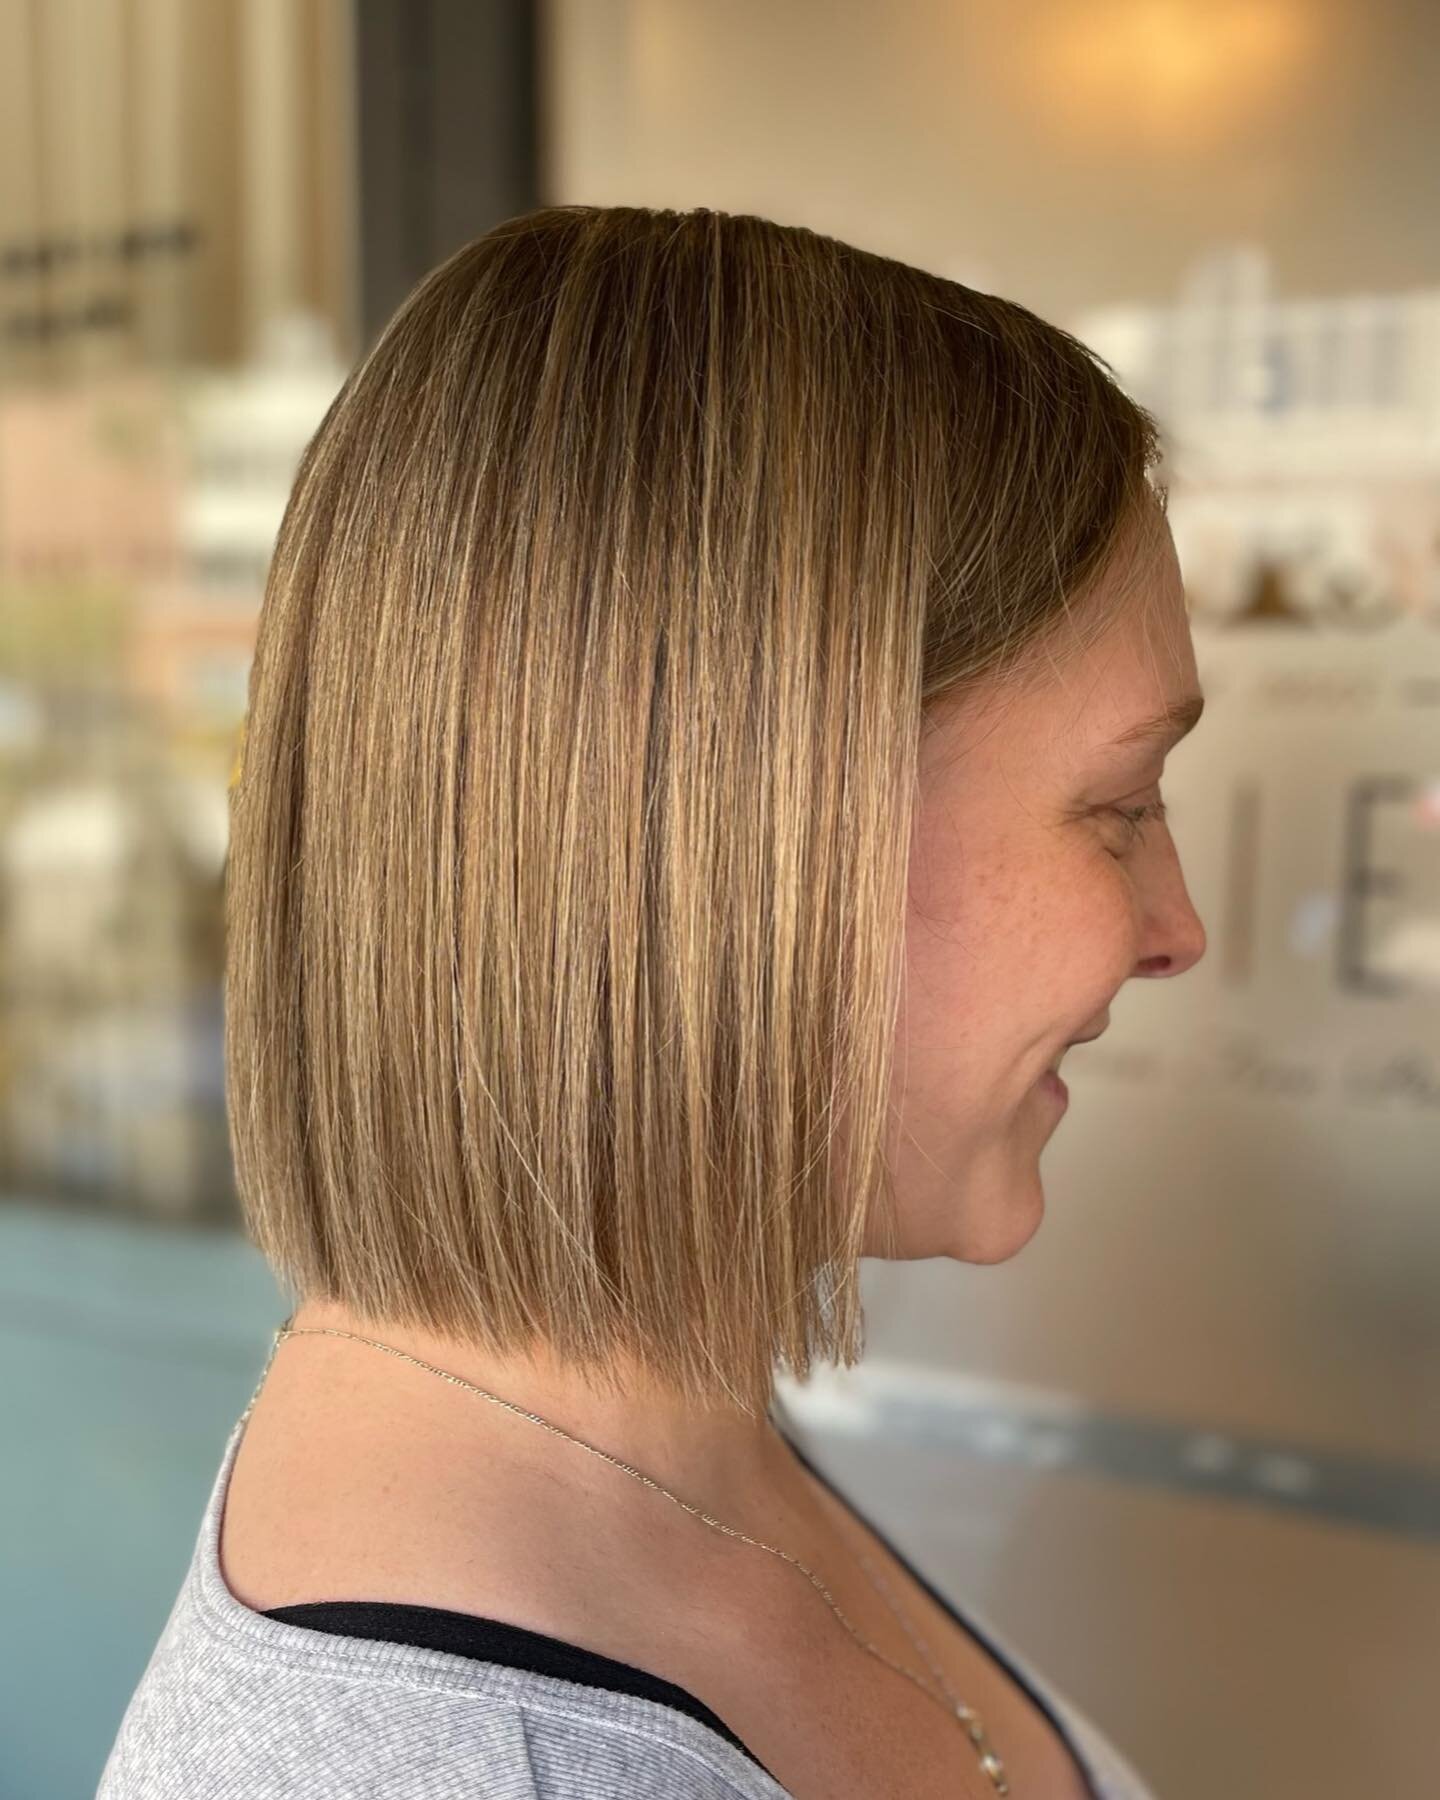 From brittle broken hair to an edgy bob 🖤 Scott&rsquo;s client started out with longer brittle hair and the length was keeping her hair from its full potential. He gave her this clean line bob and did a #redfieldsnaturalblonde color on her including